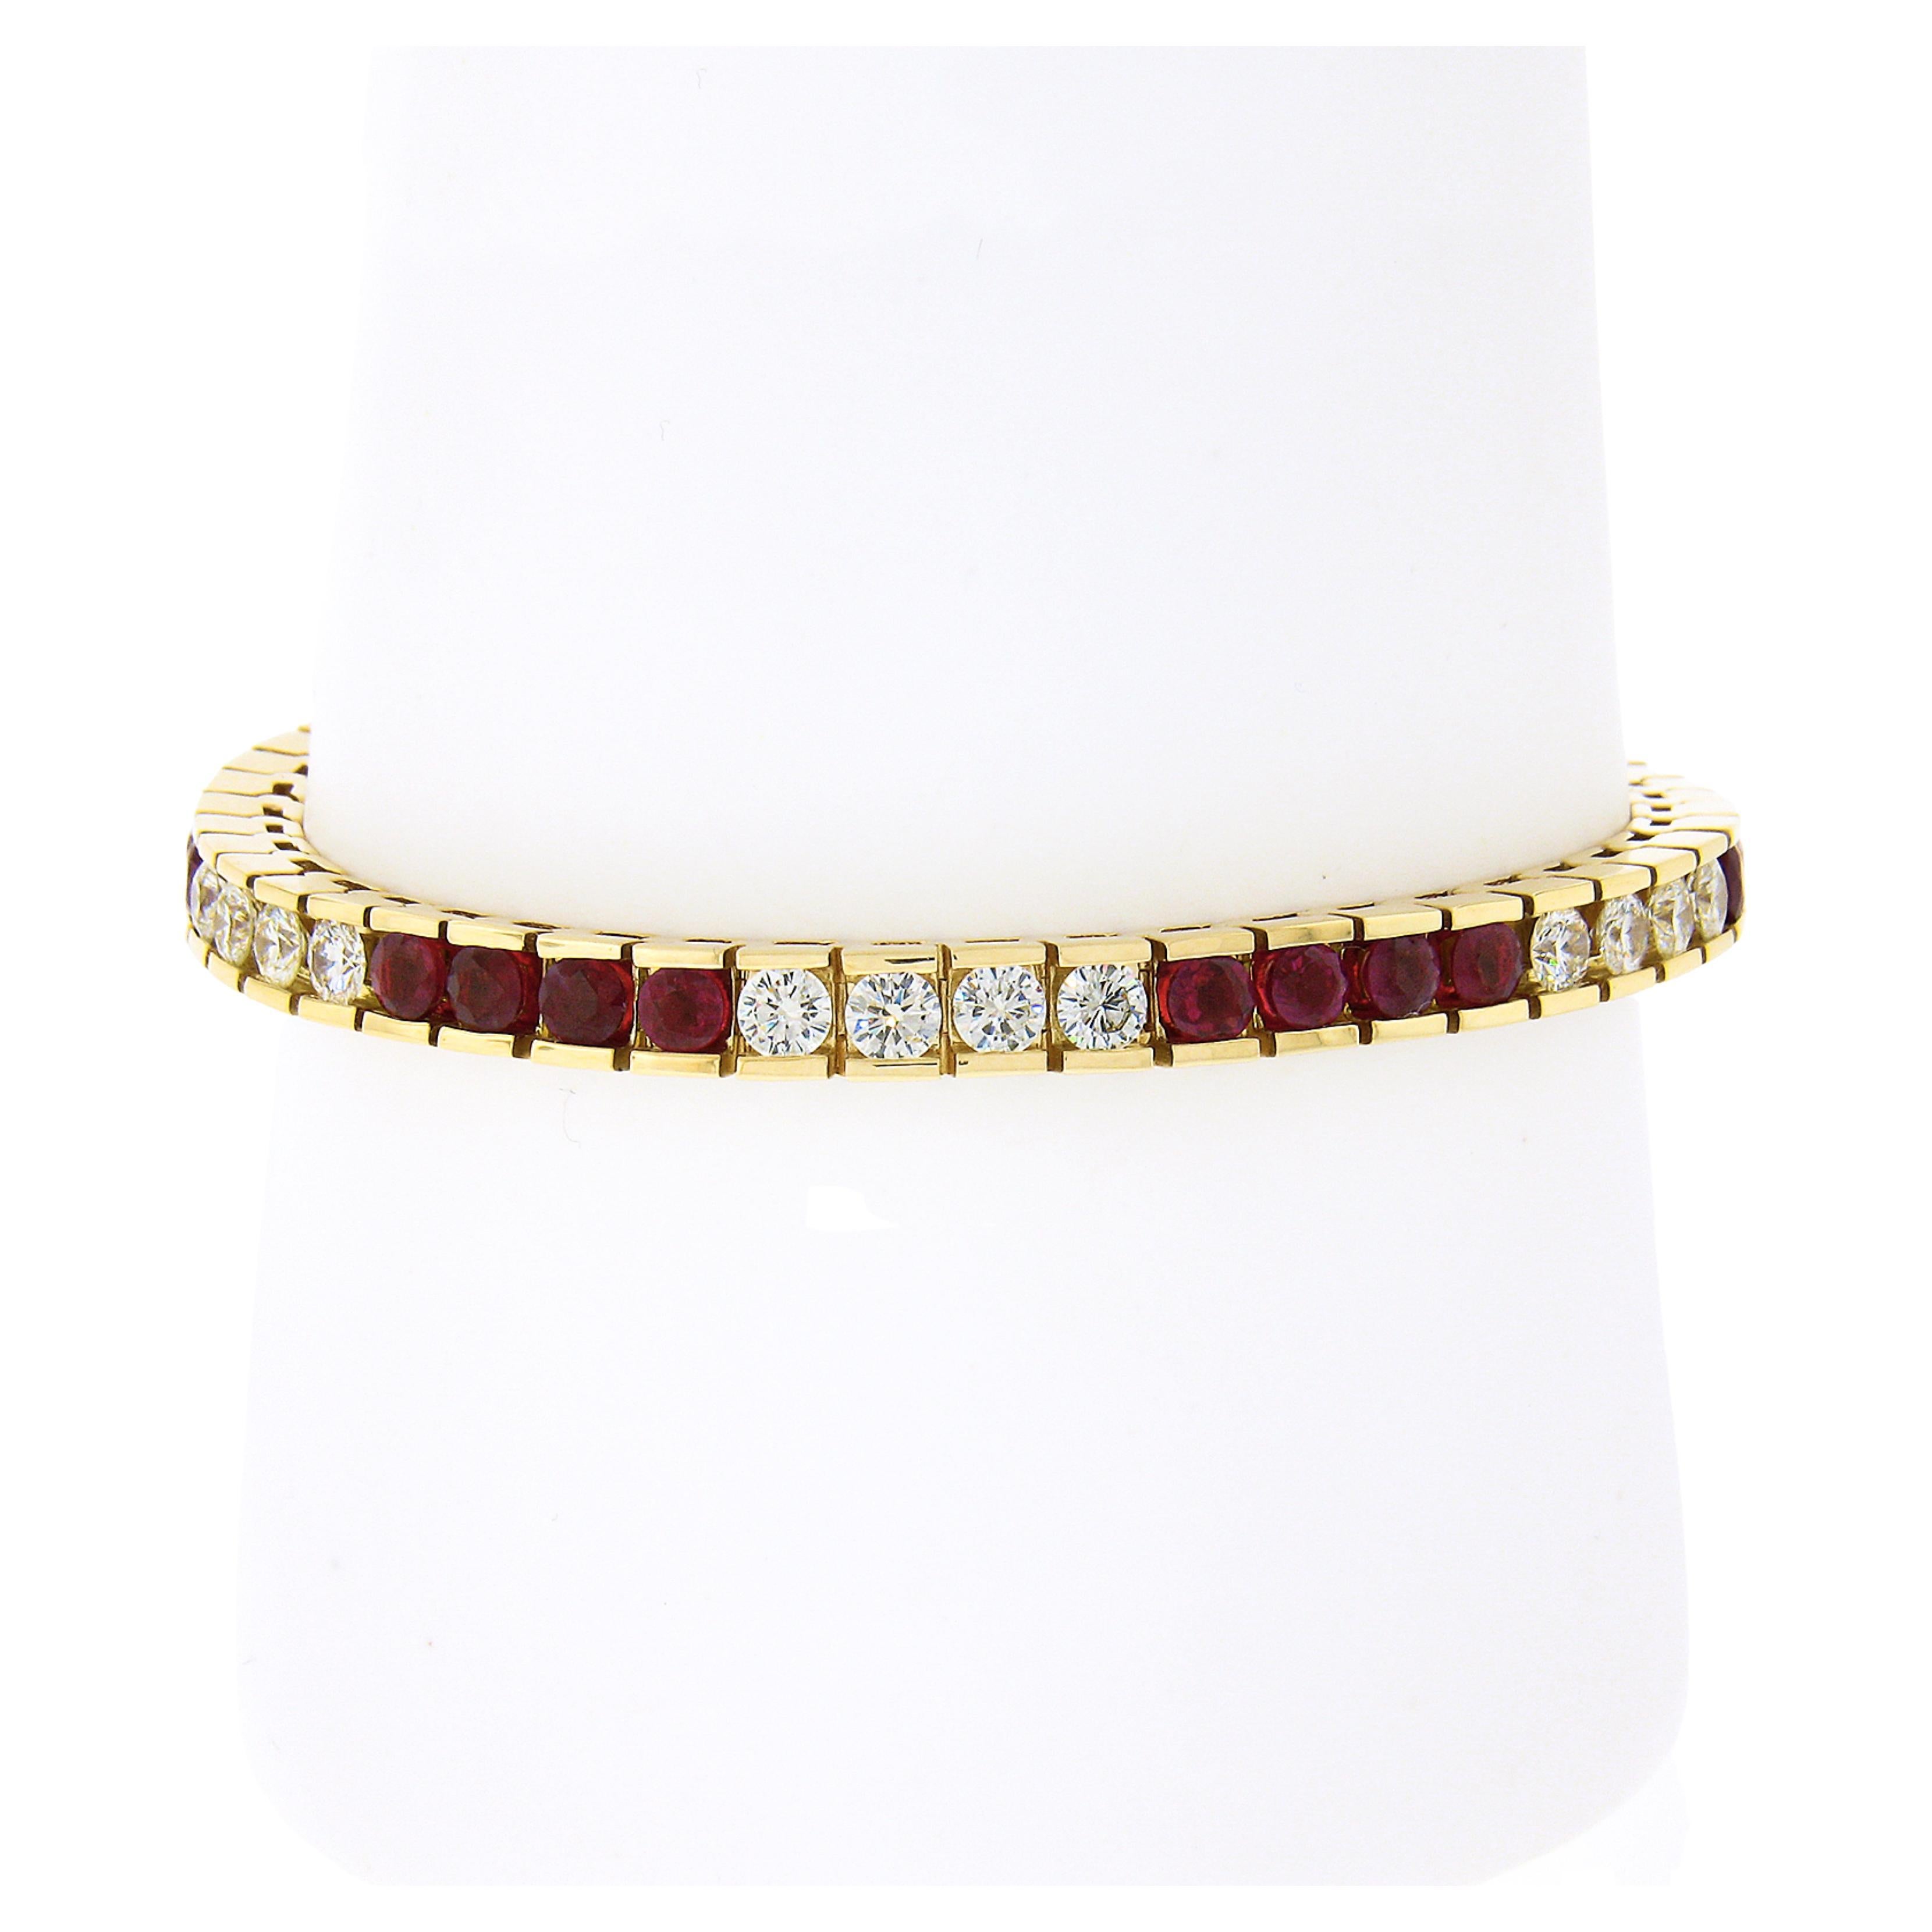 This breathtaking and solidly made line tennis bracelet is crafted in solid 18k yellow gold and features truly fine quality natural ruby and diamond stones that are individually channel set in r squared and smoothly connected links throughout. The